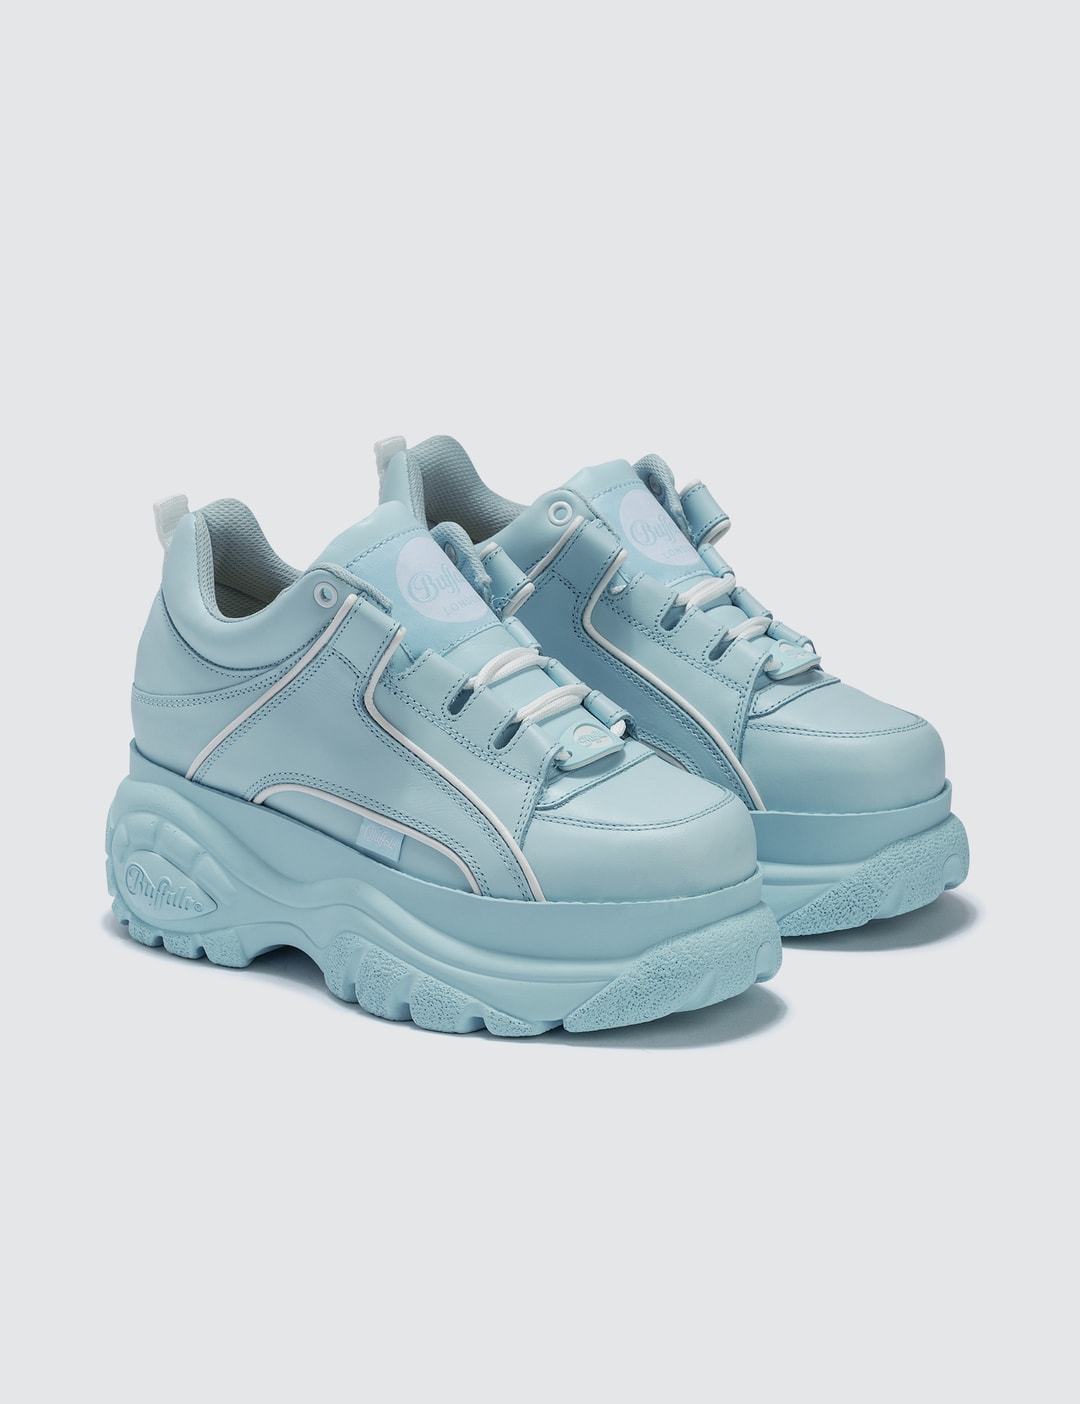 Buffalo London - Buffalo Classic Blue Low-top Platform Sneakers | HBX - Globally Curated Fashion and Lifestyle by Hypebeast